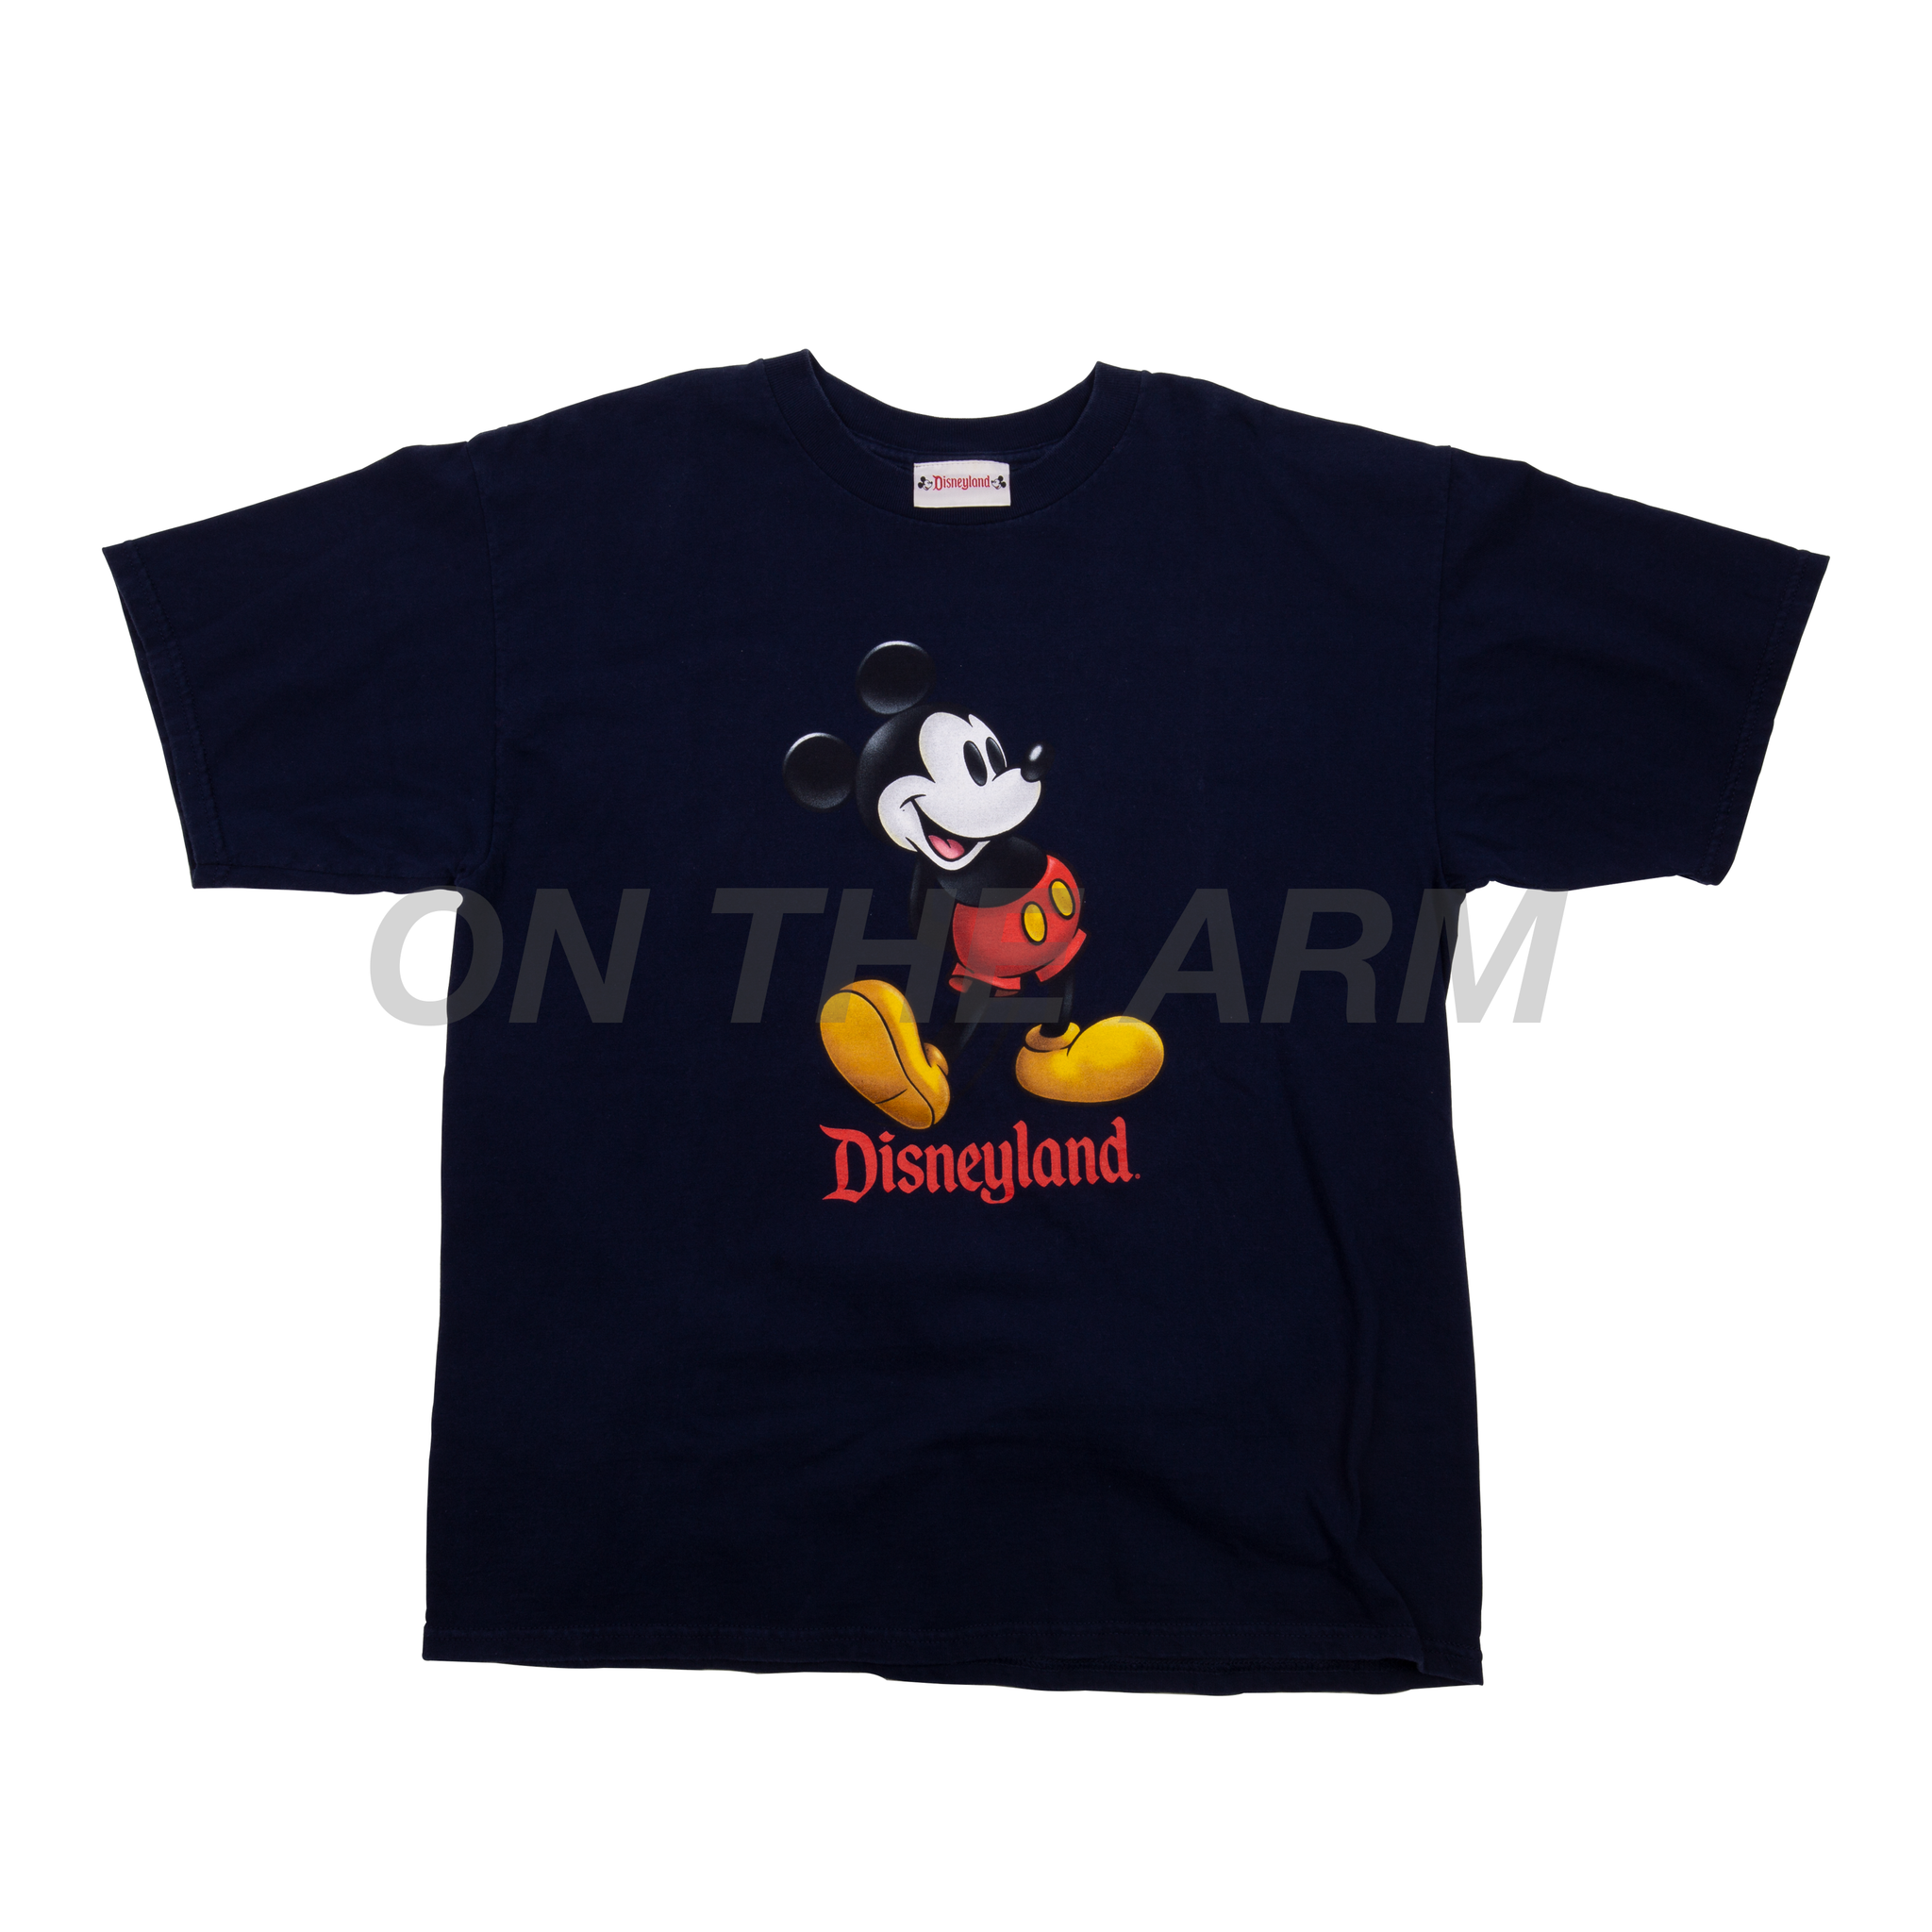 Vintage Navy Mickey Mouse Tee